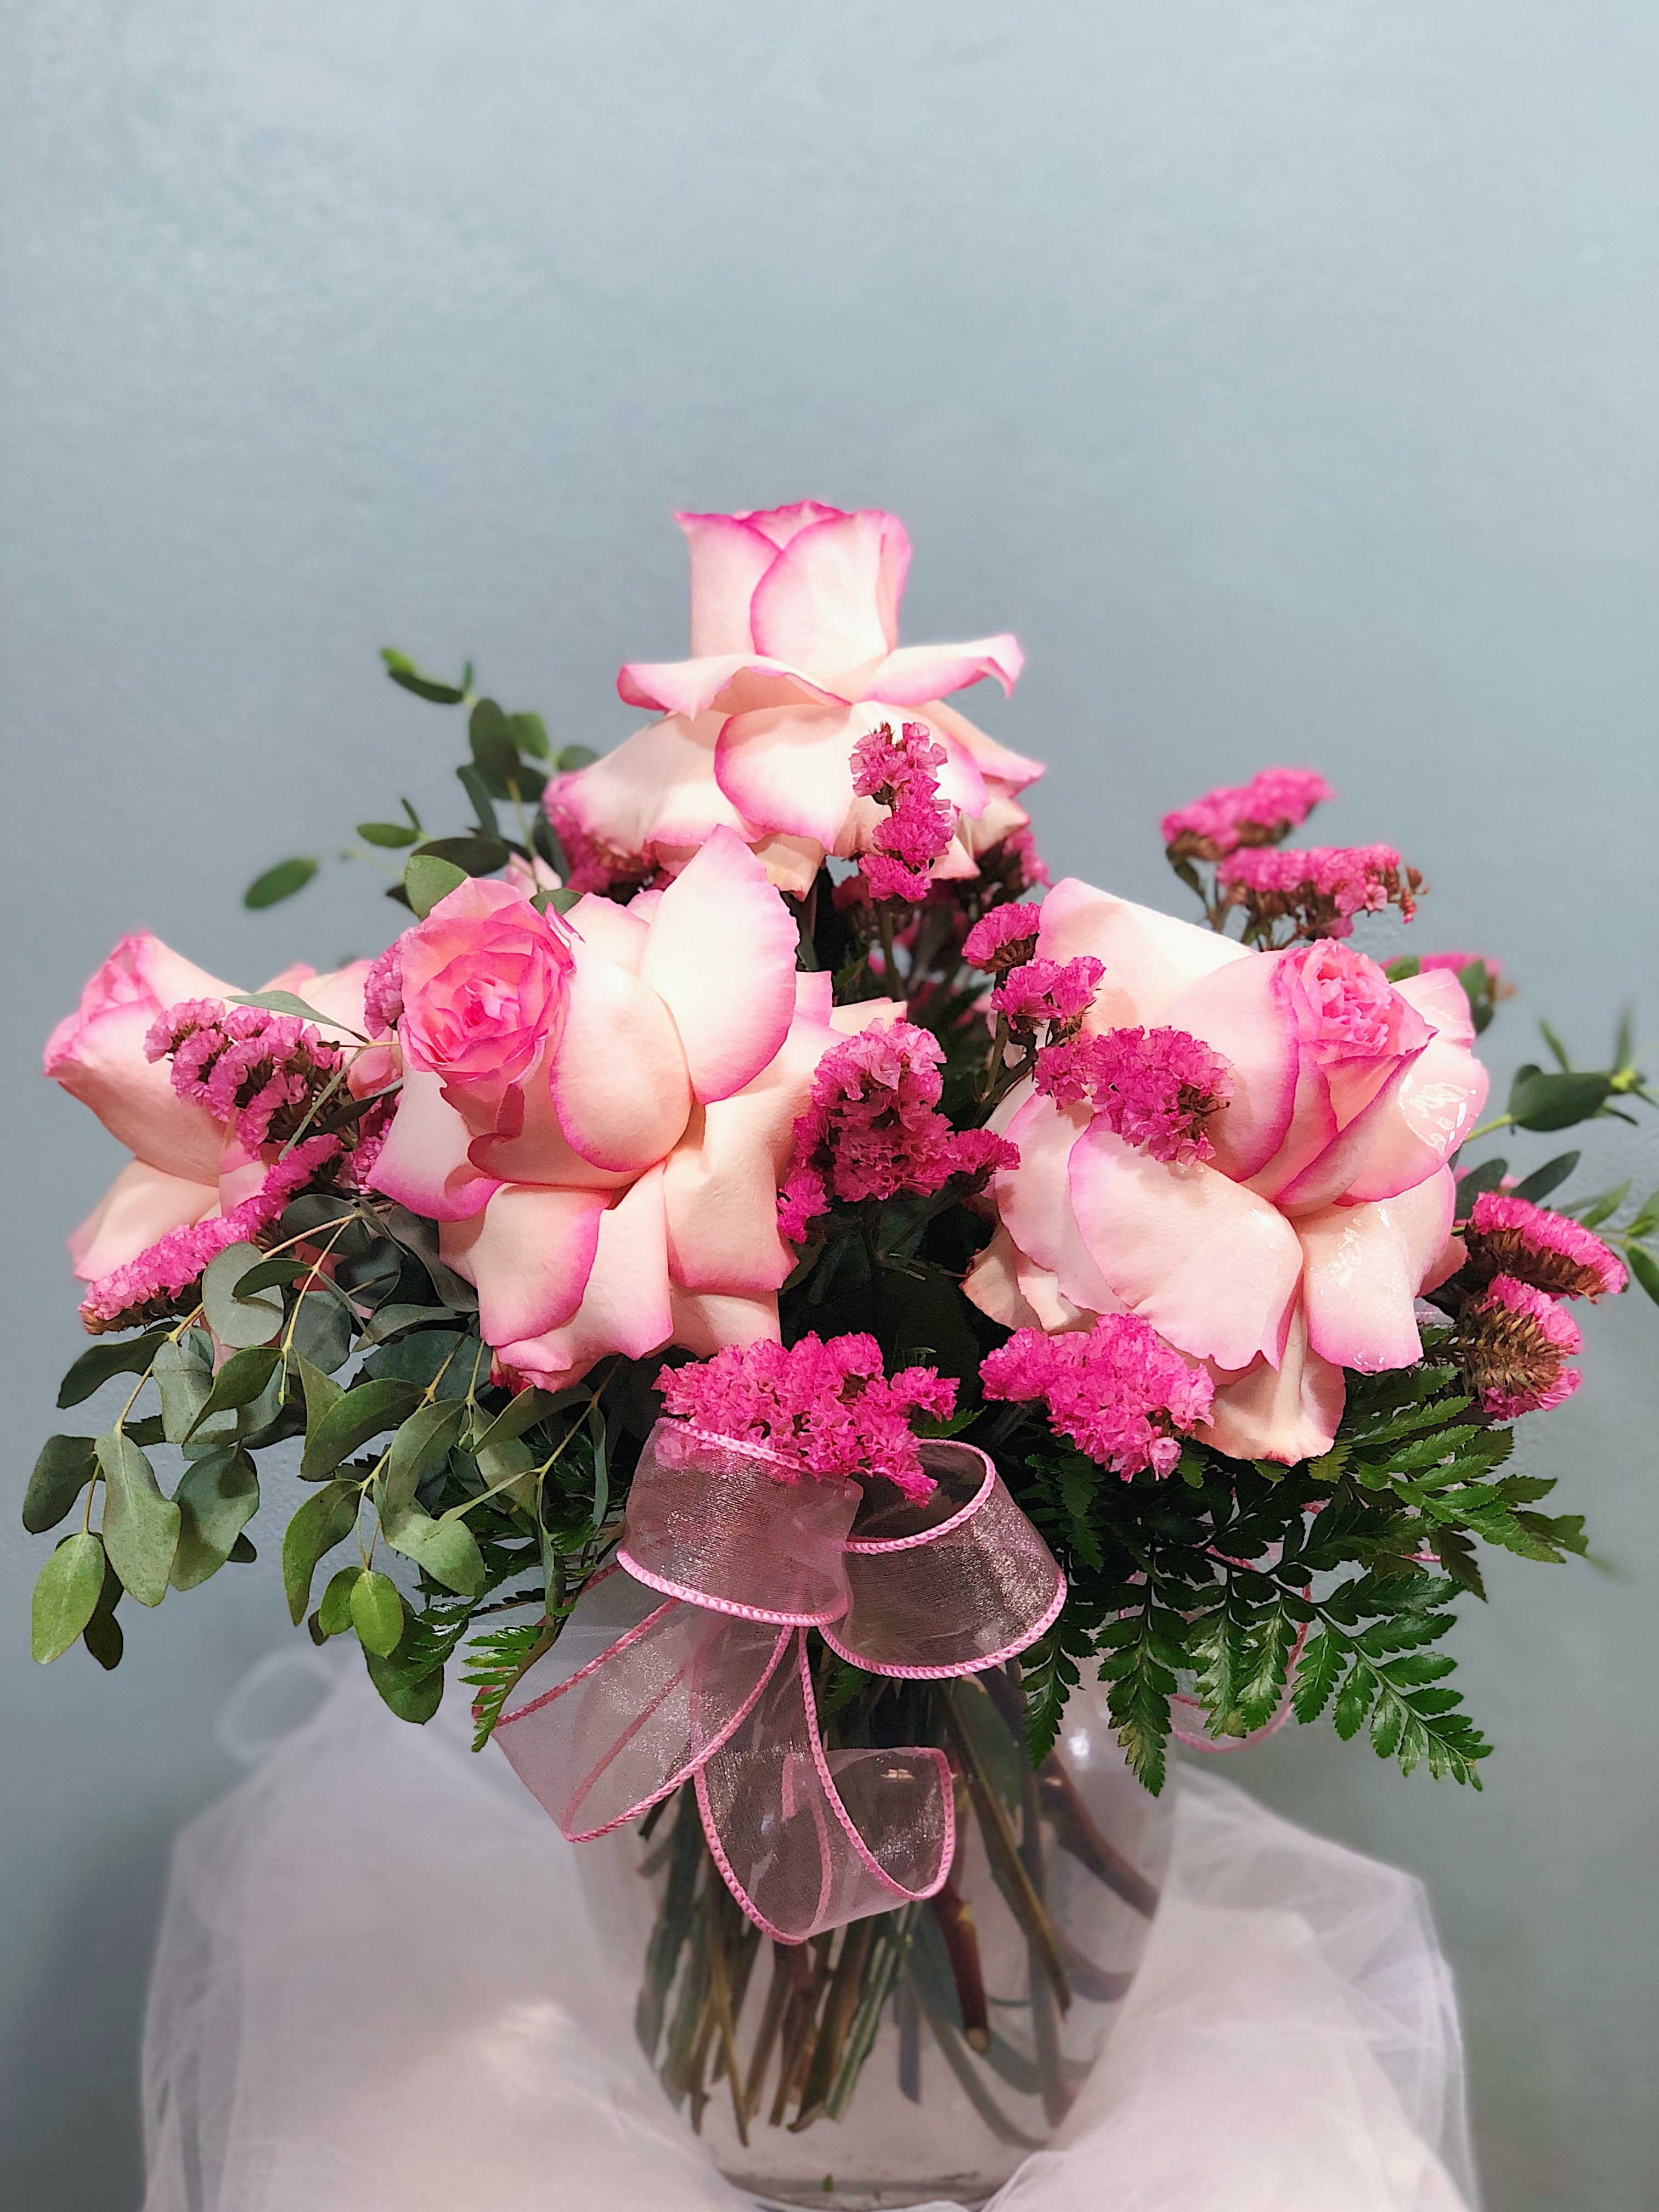 Veronica Esperance  Half Dozen  - Veronica Esperance, is this a floral detective alias or is it a low and lush styled half dozen rose arrangement in a clear keepsake Veronica vase. This arrangement contains six white and pale pink esperance roses paired with hot pink statice and green leather leaf. Three matching pink bows are added between the flowers for the final touches!